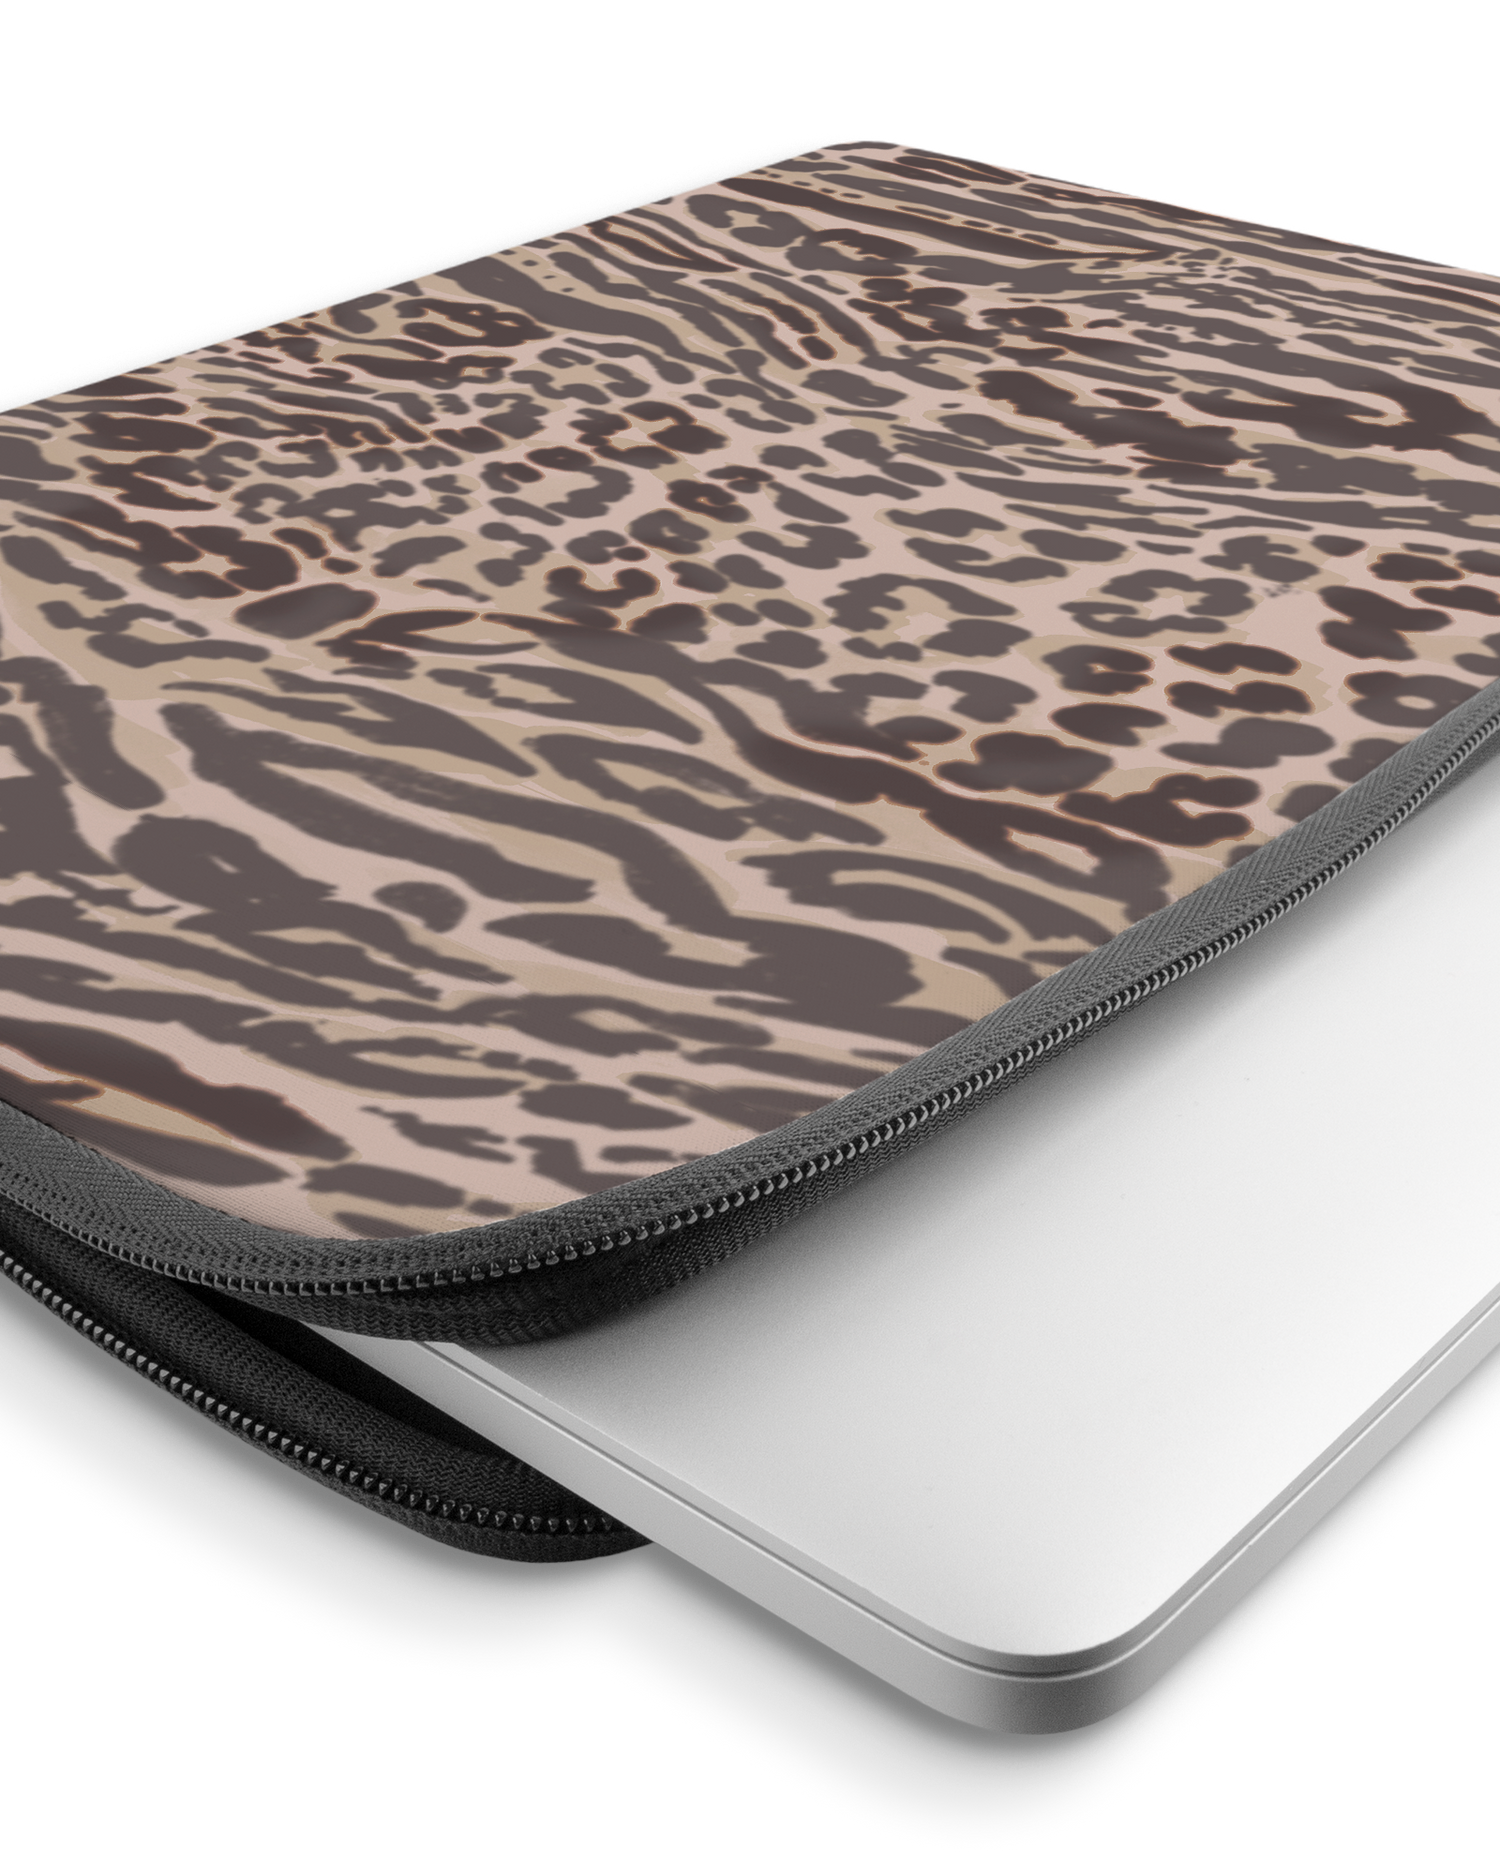 Animal Skin Tough Love Laptop Case 15-16 inch with device inside